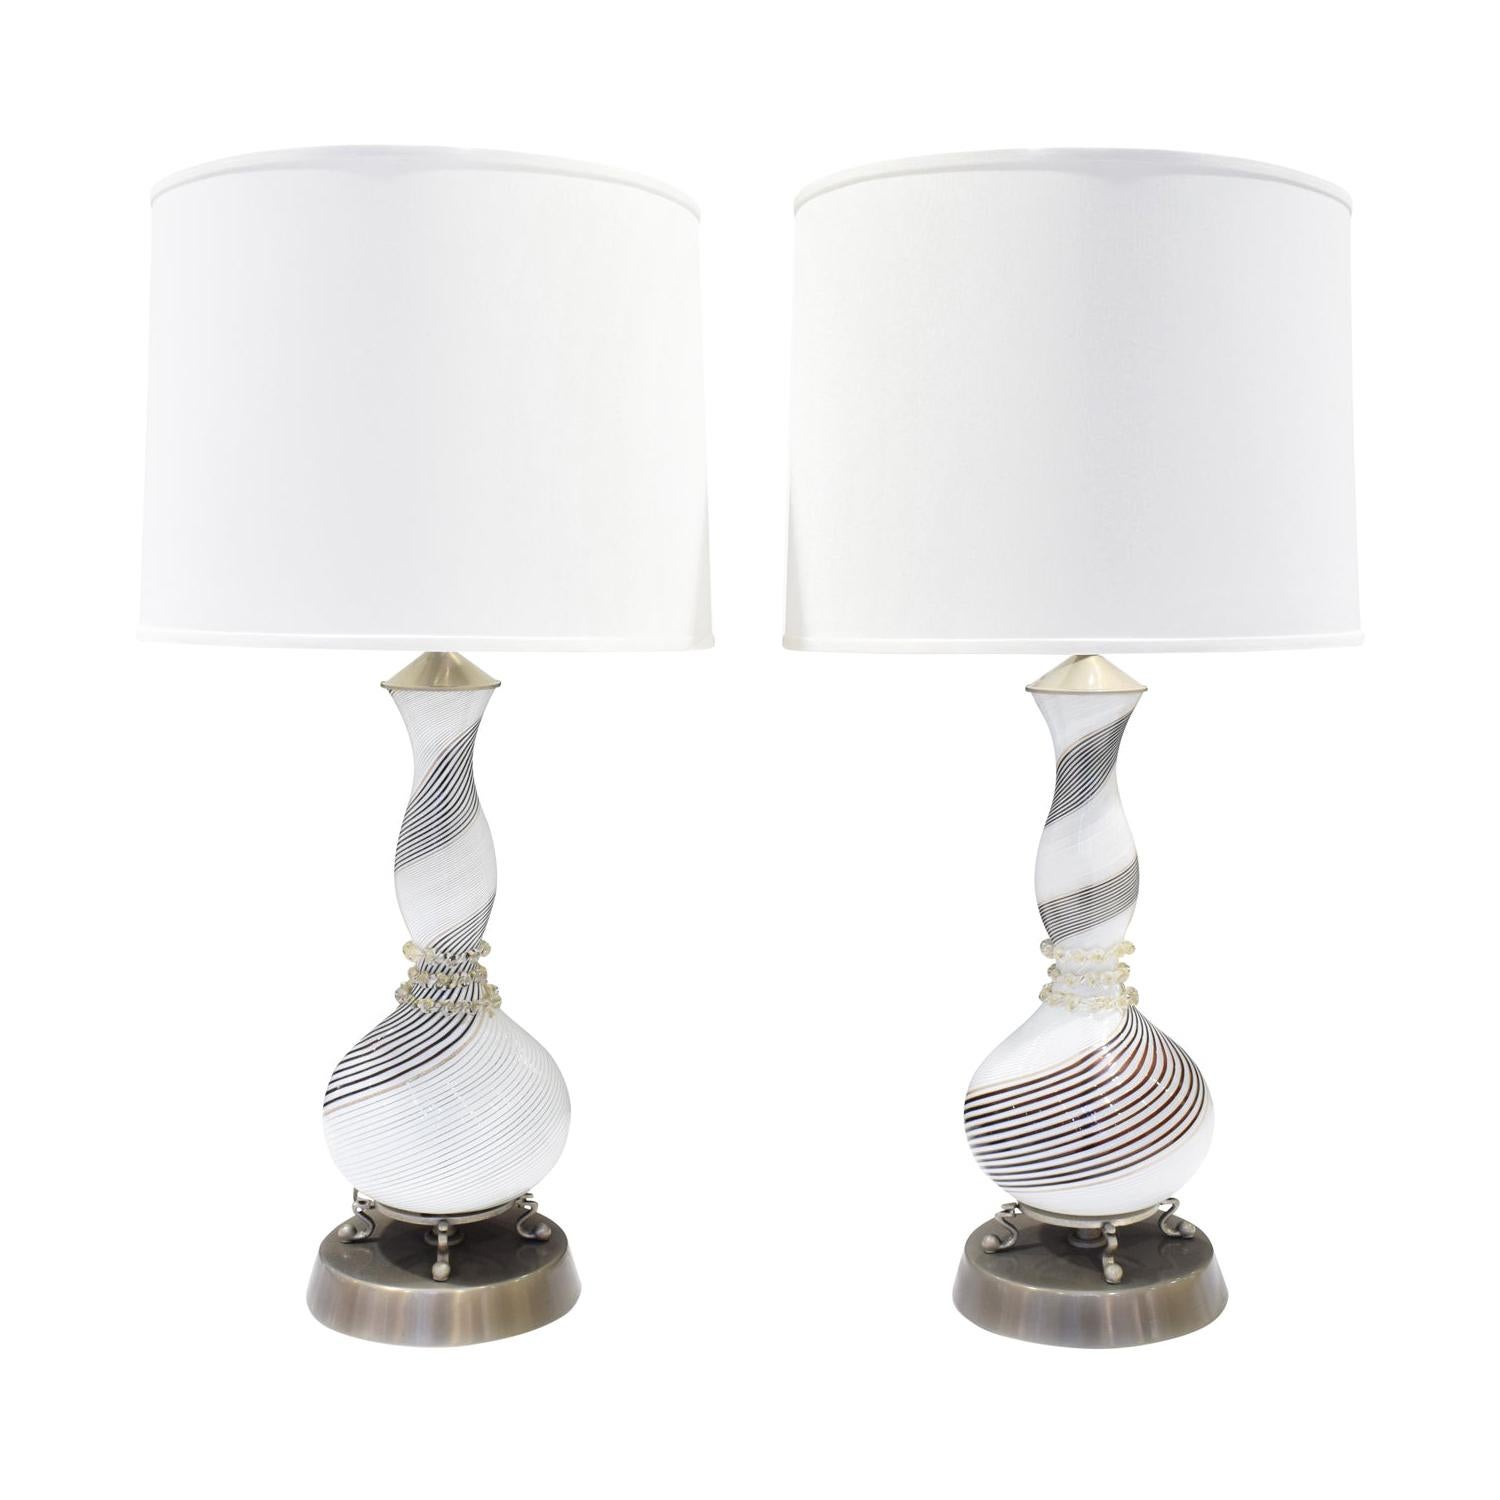 Dino Martens Pair of Hand-Blown Glass Table Lamps, 1950s